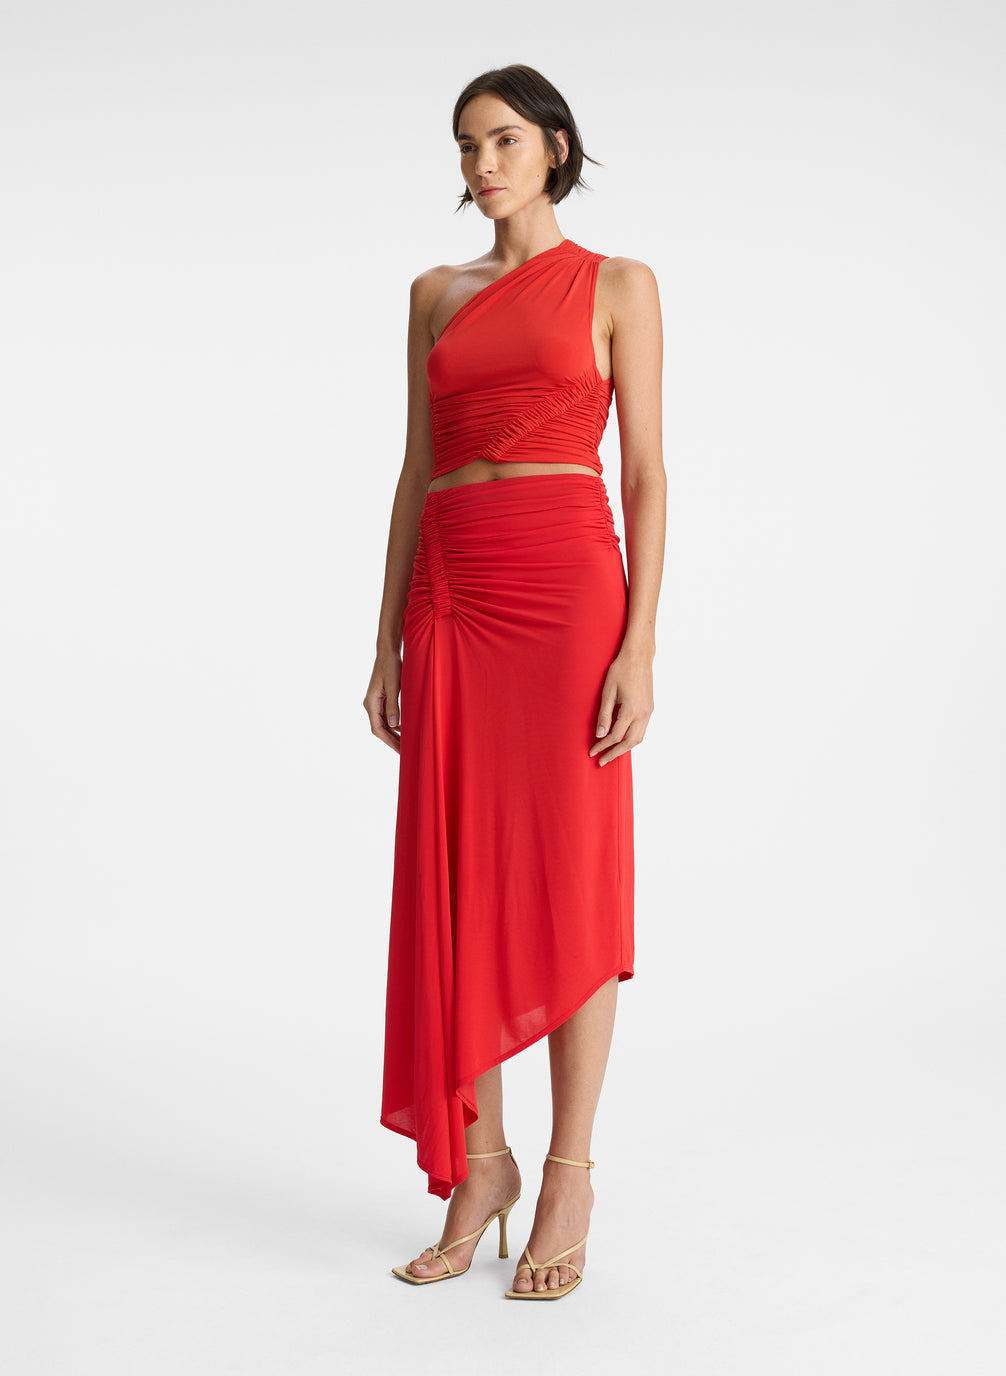 side view of woman wearing red one shoulder tank top and red ruched midi skirt